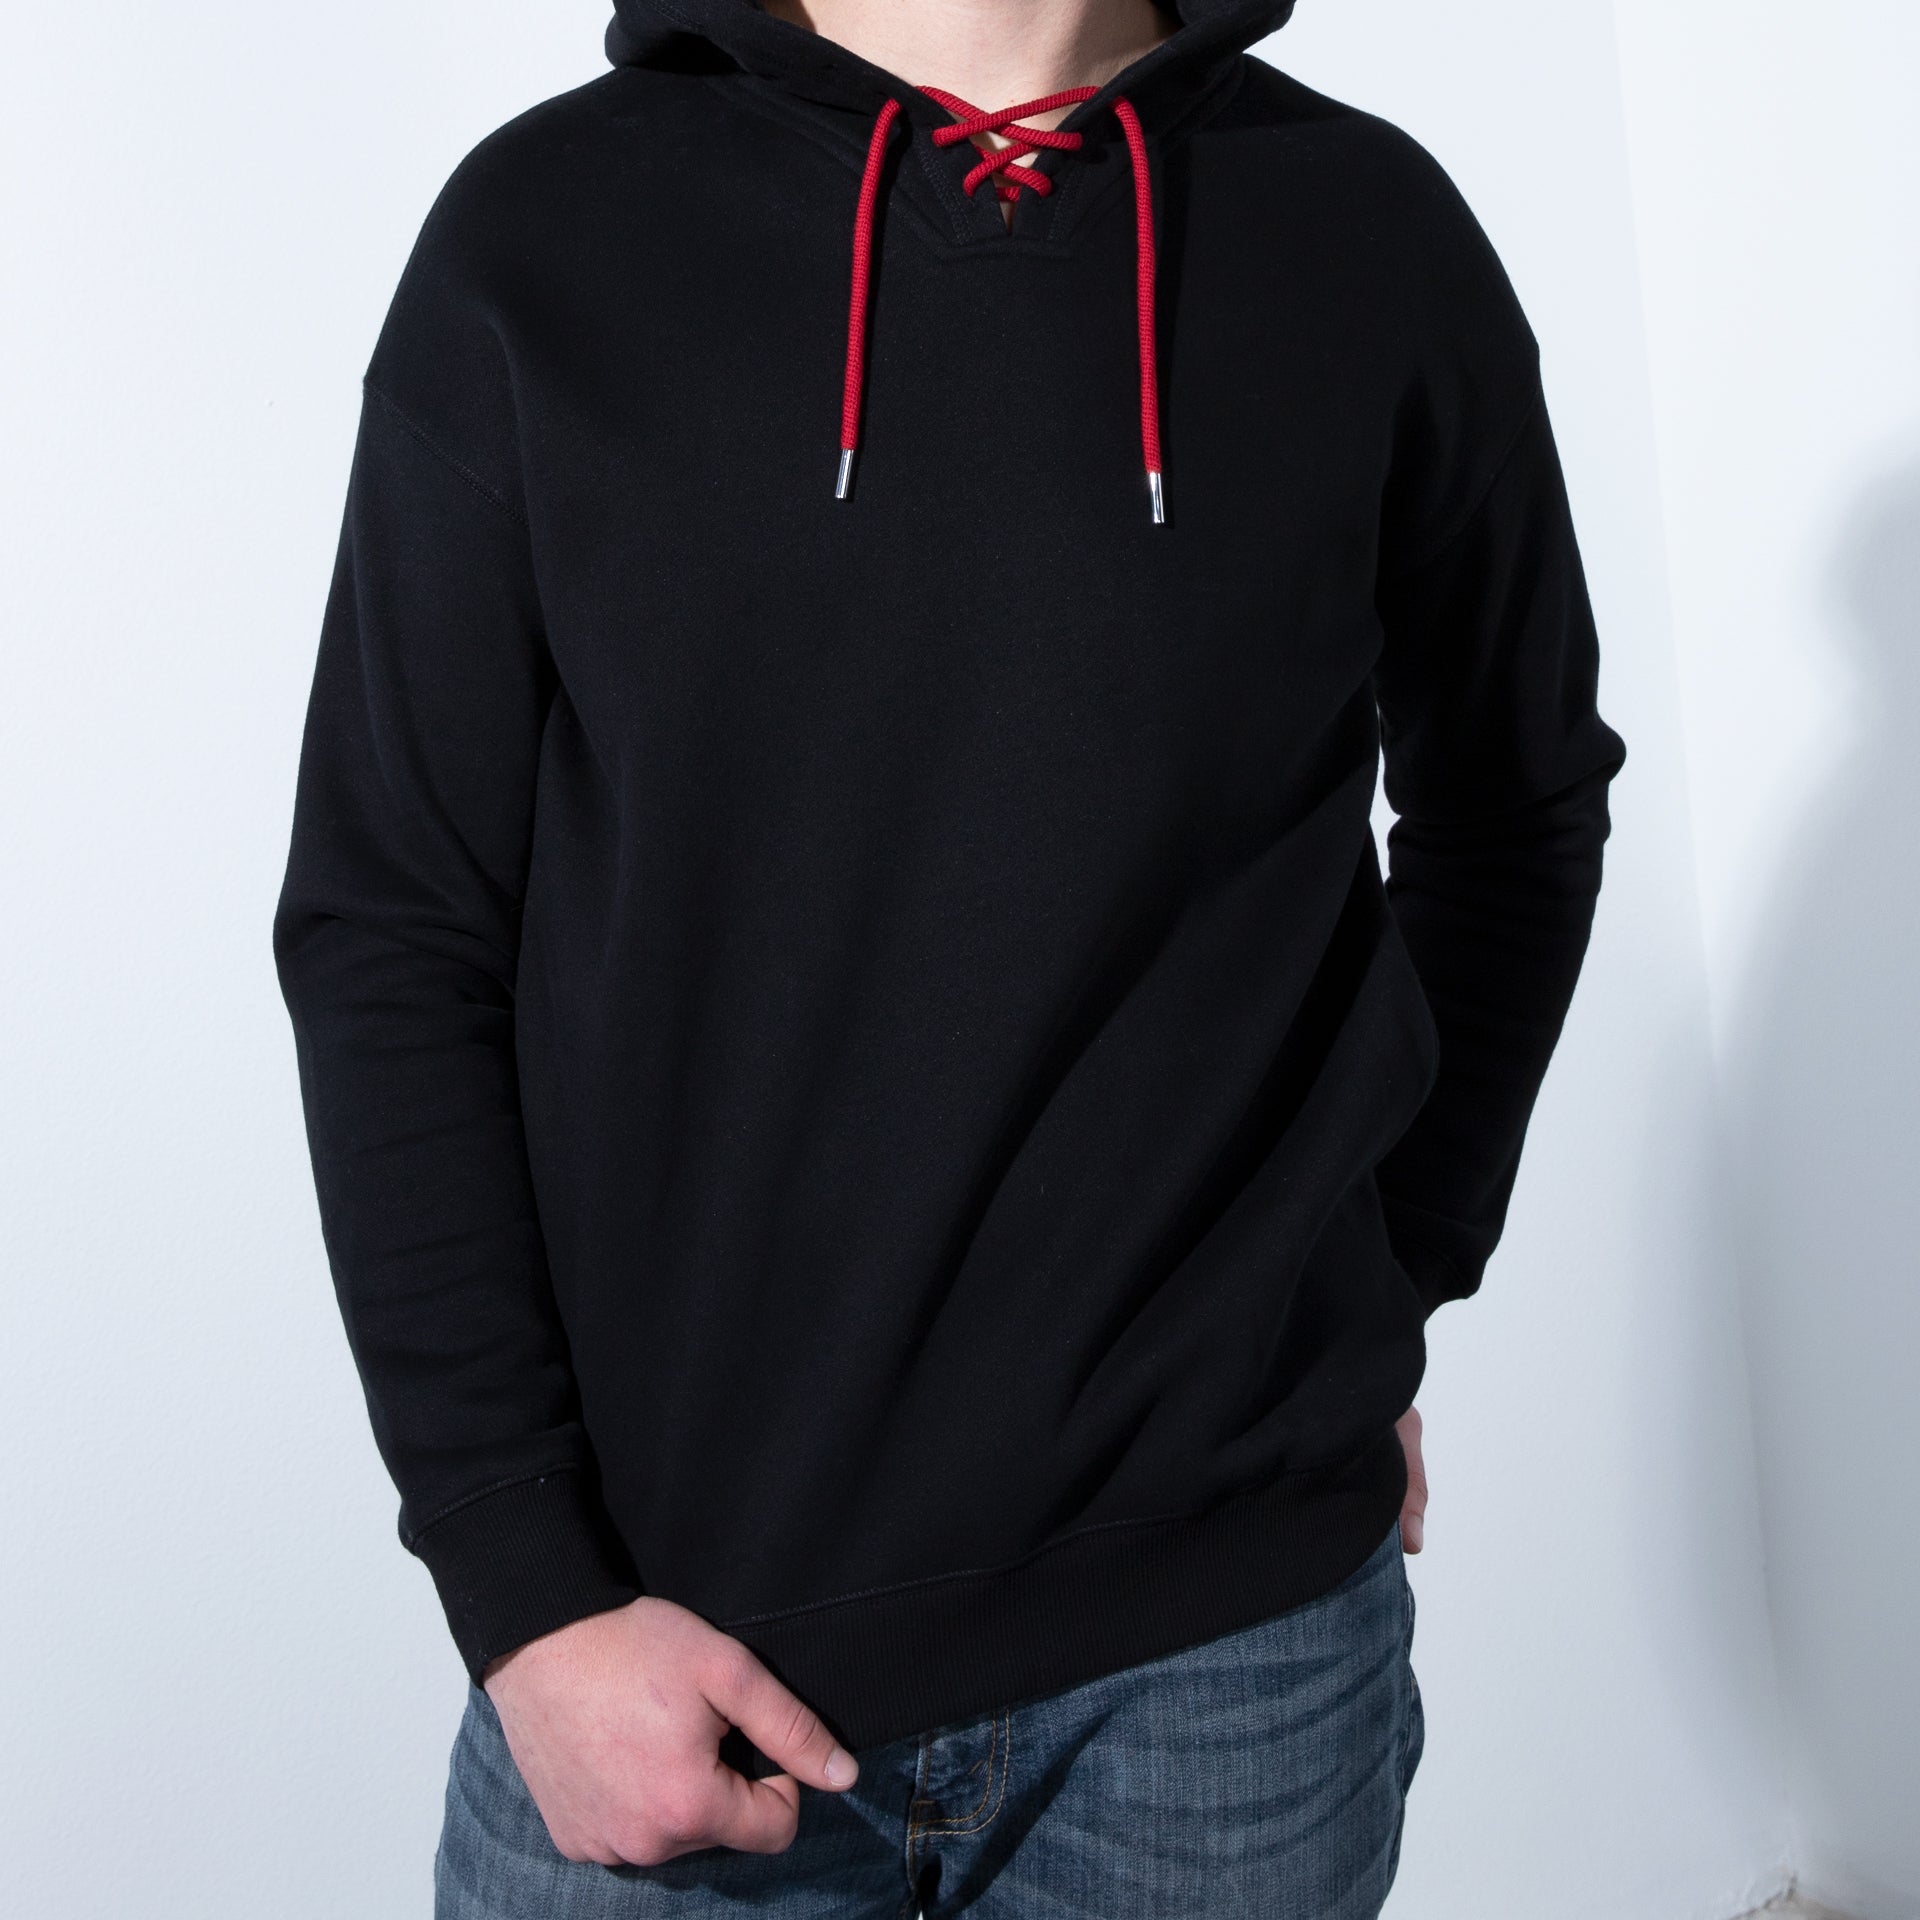 Black Hoodie with Colored drawstrings, Pullover casual sweatshirts